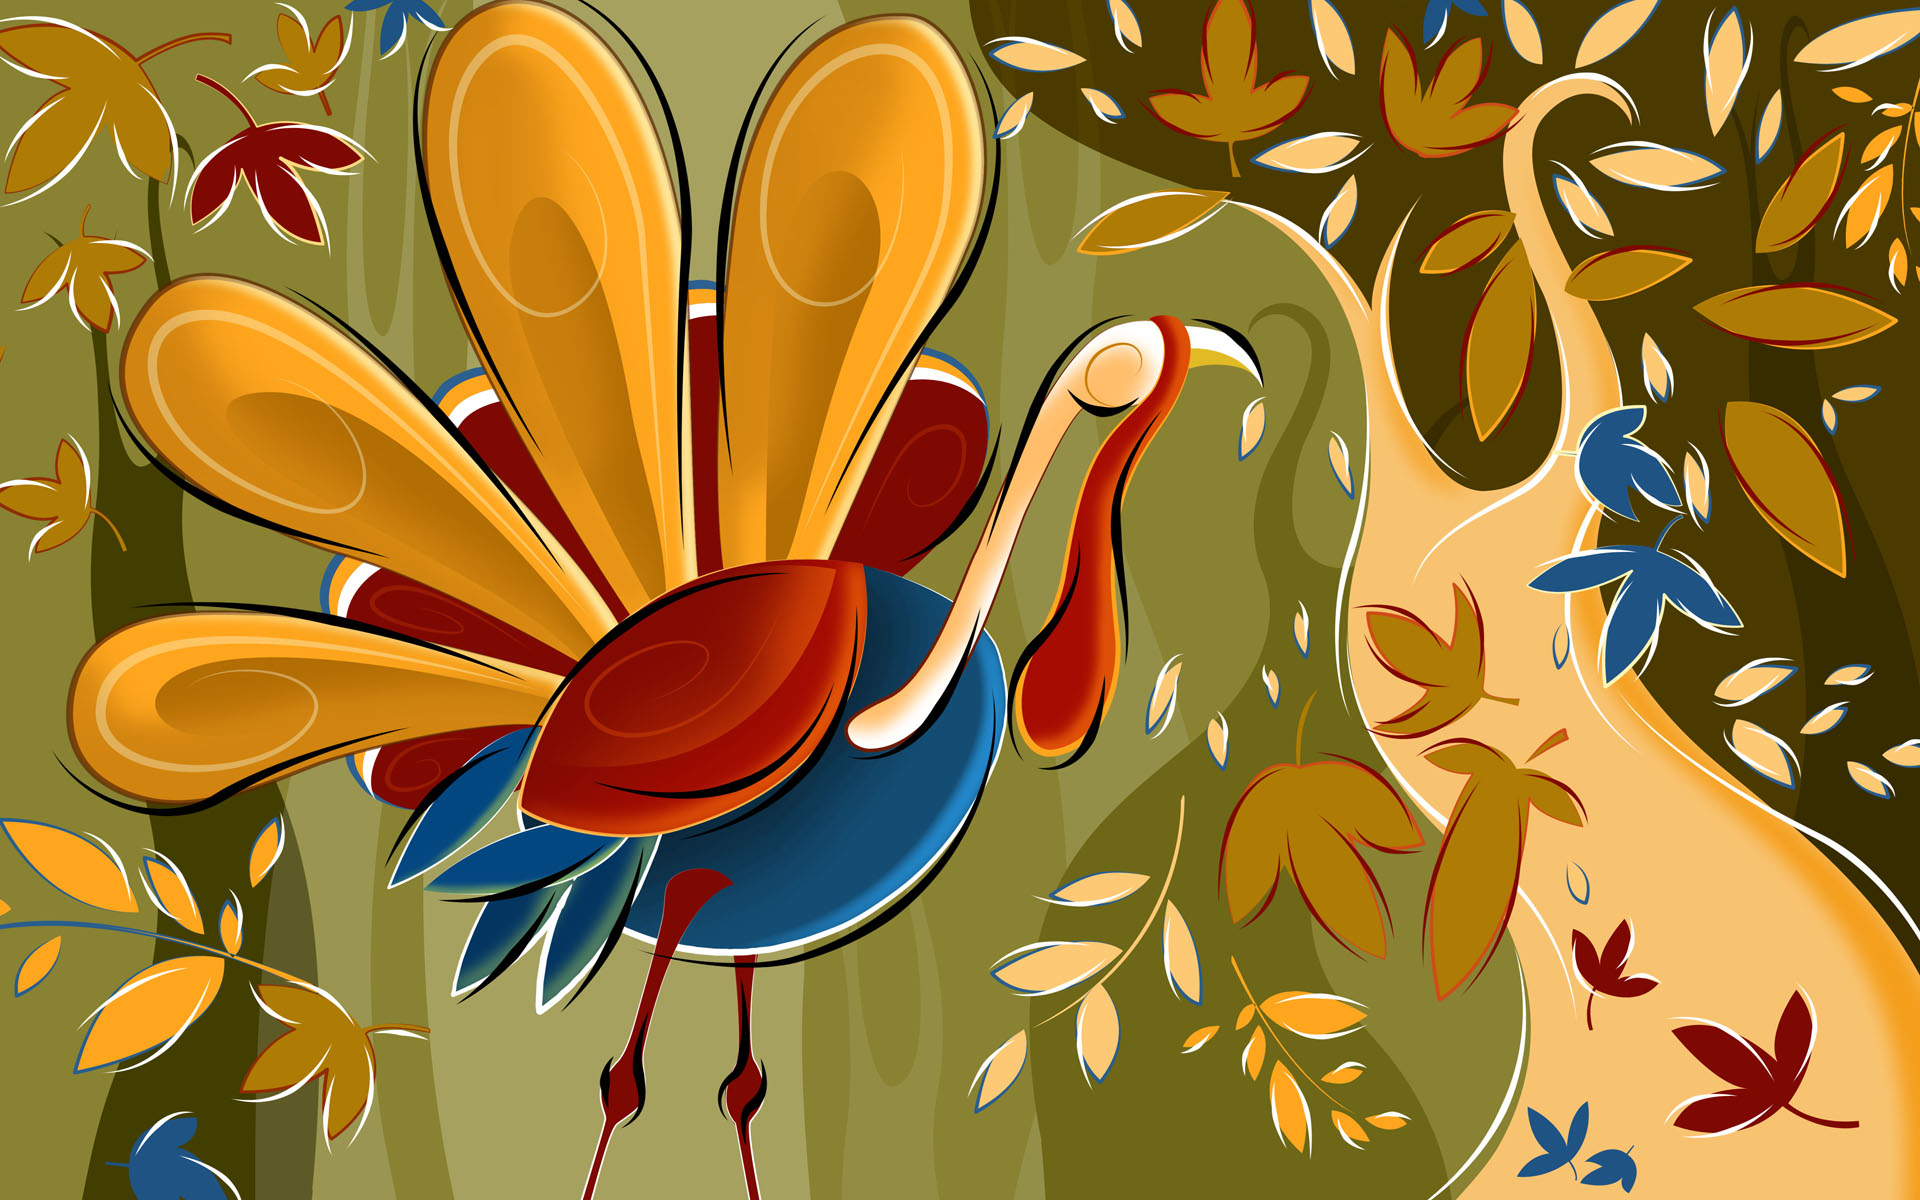 Turkey Thanksgiving is a great wallpaper for your computer desktop